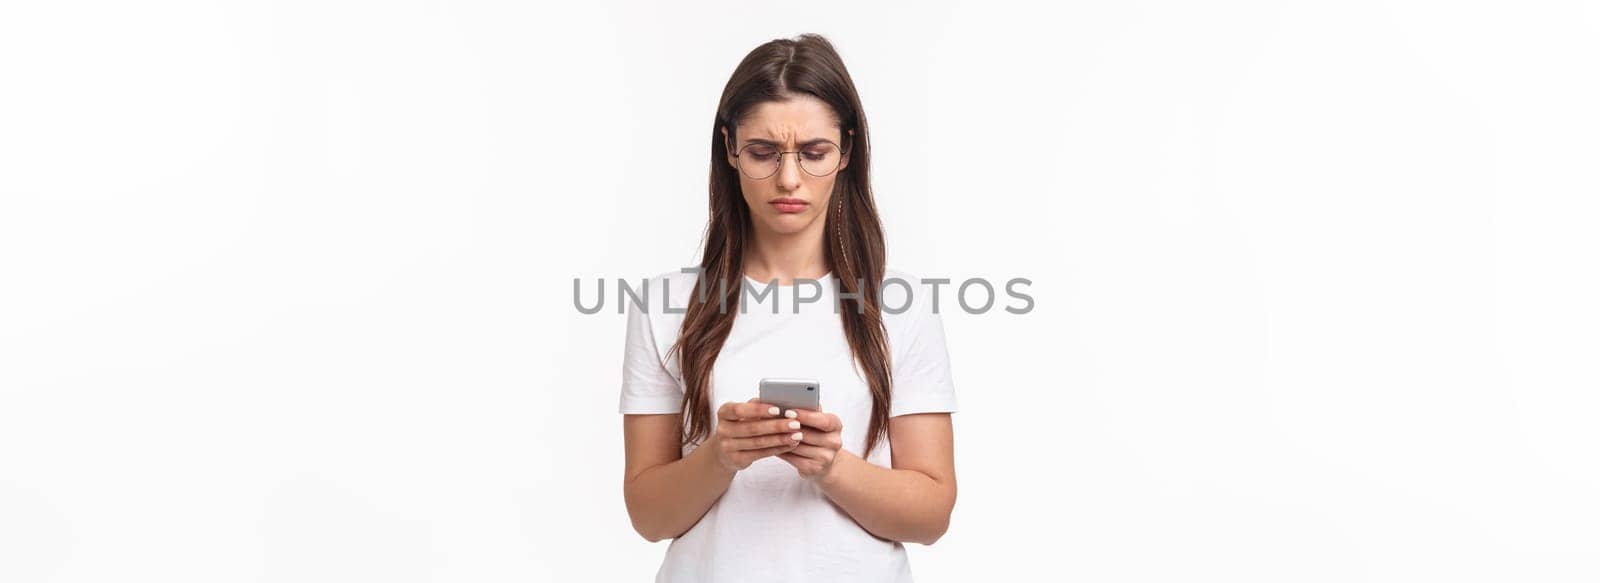 Communication, technology and lifestyle concept. Portrait of troubled and confused young woman reading strange message, frowning as looking mobile phone display, stand white background.